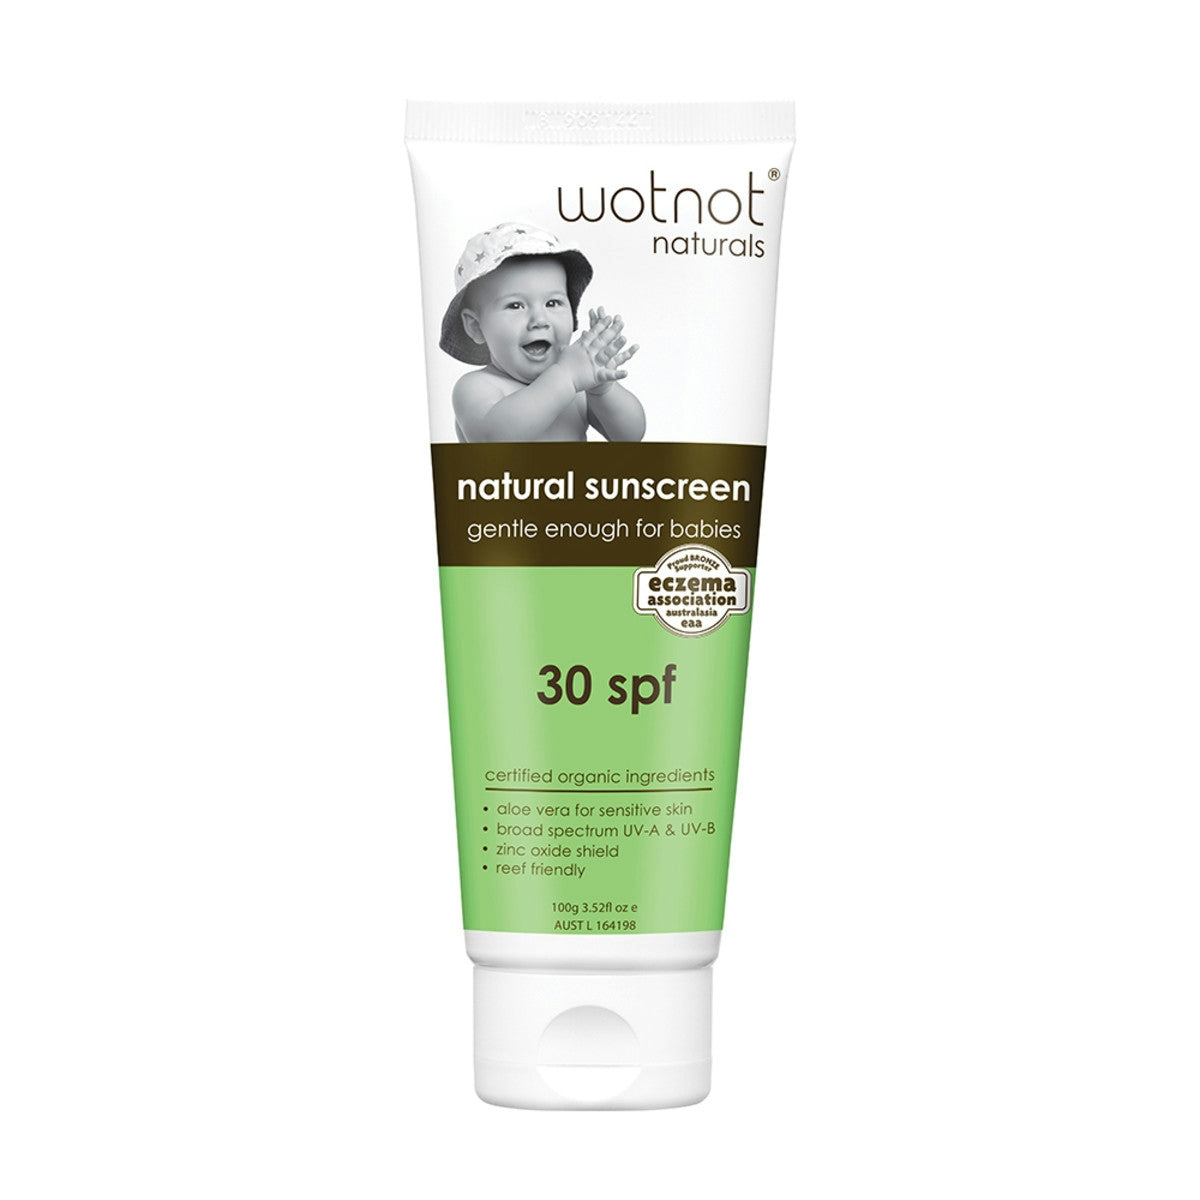 image of Wotnot Natural Sunscreen 30 SPF 100g on white background